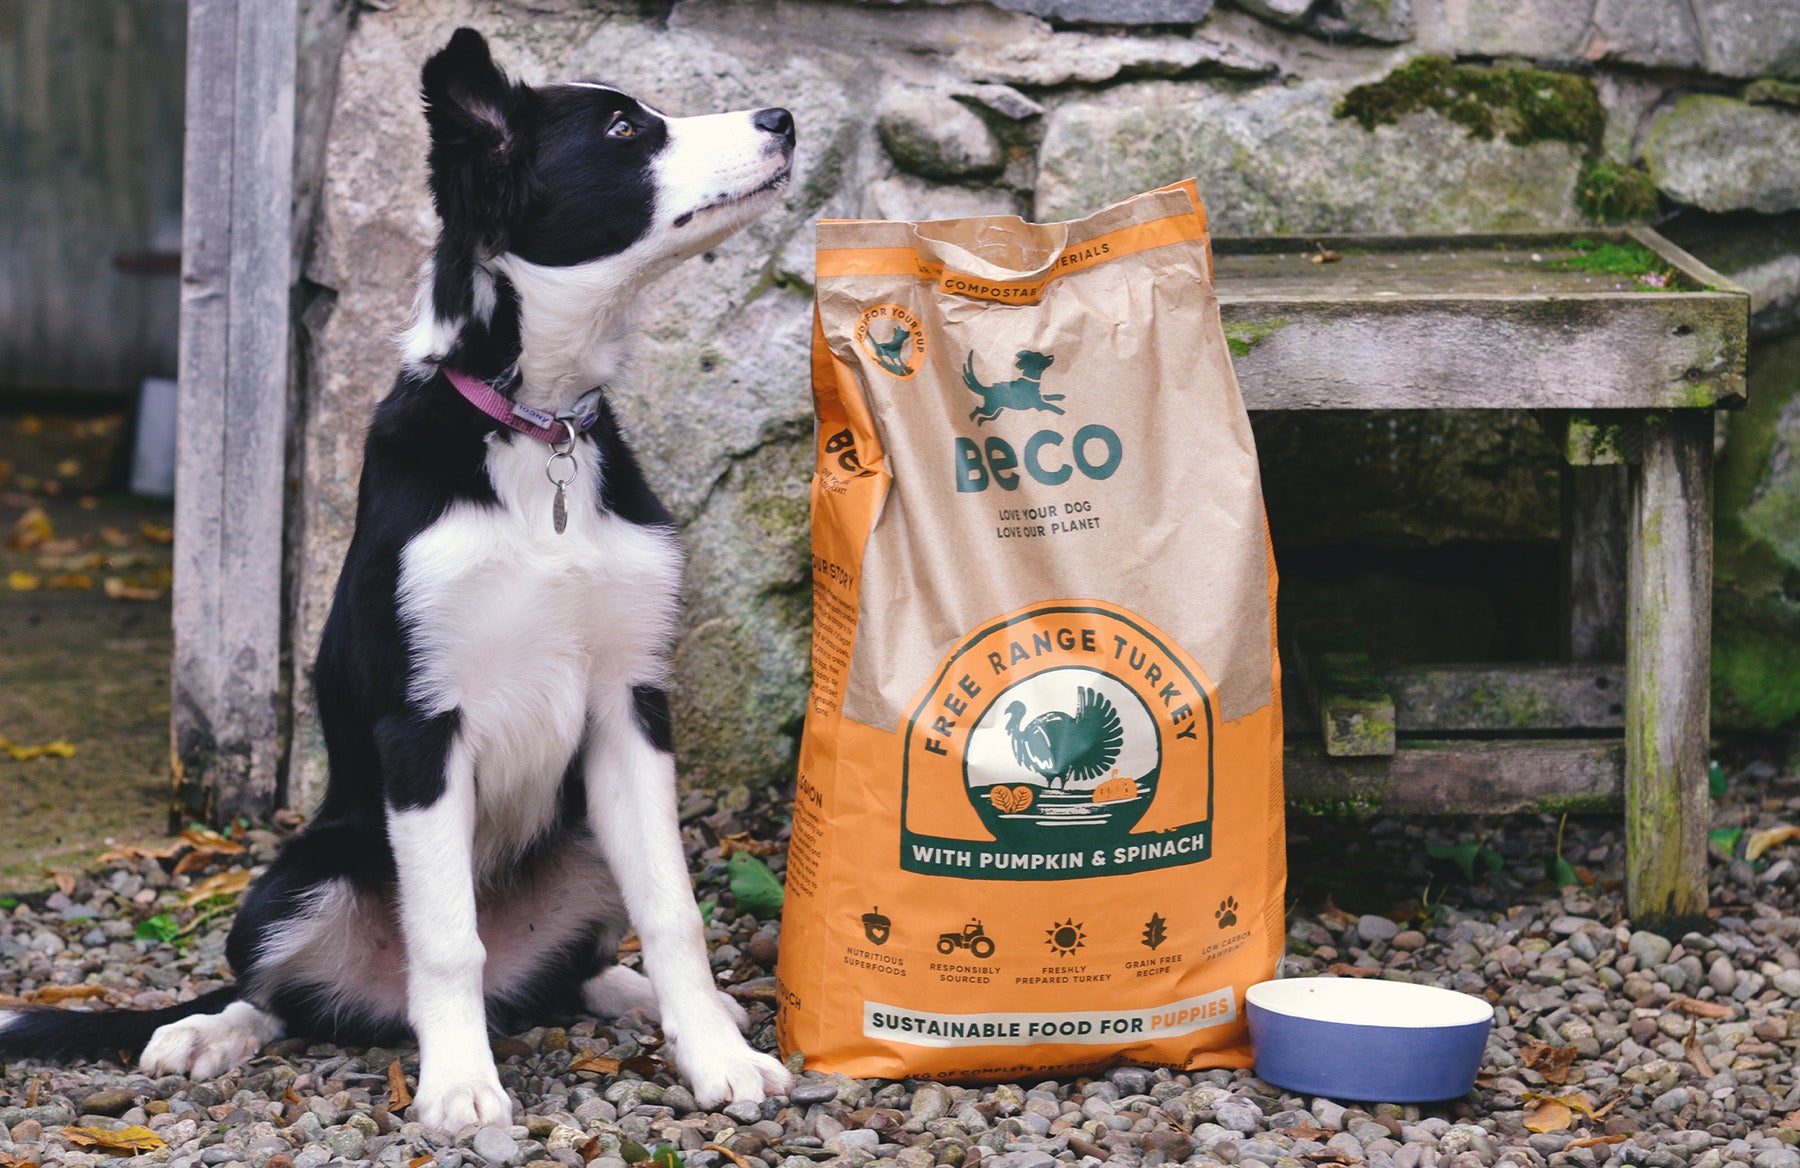 why is grain free food better for dogs